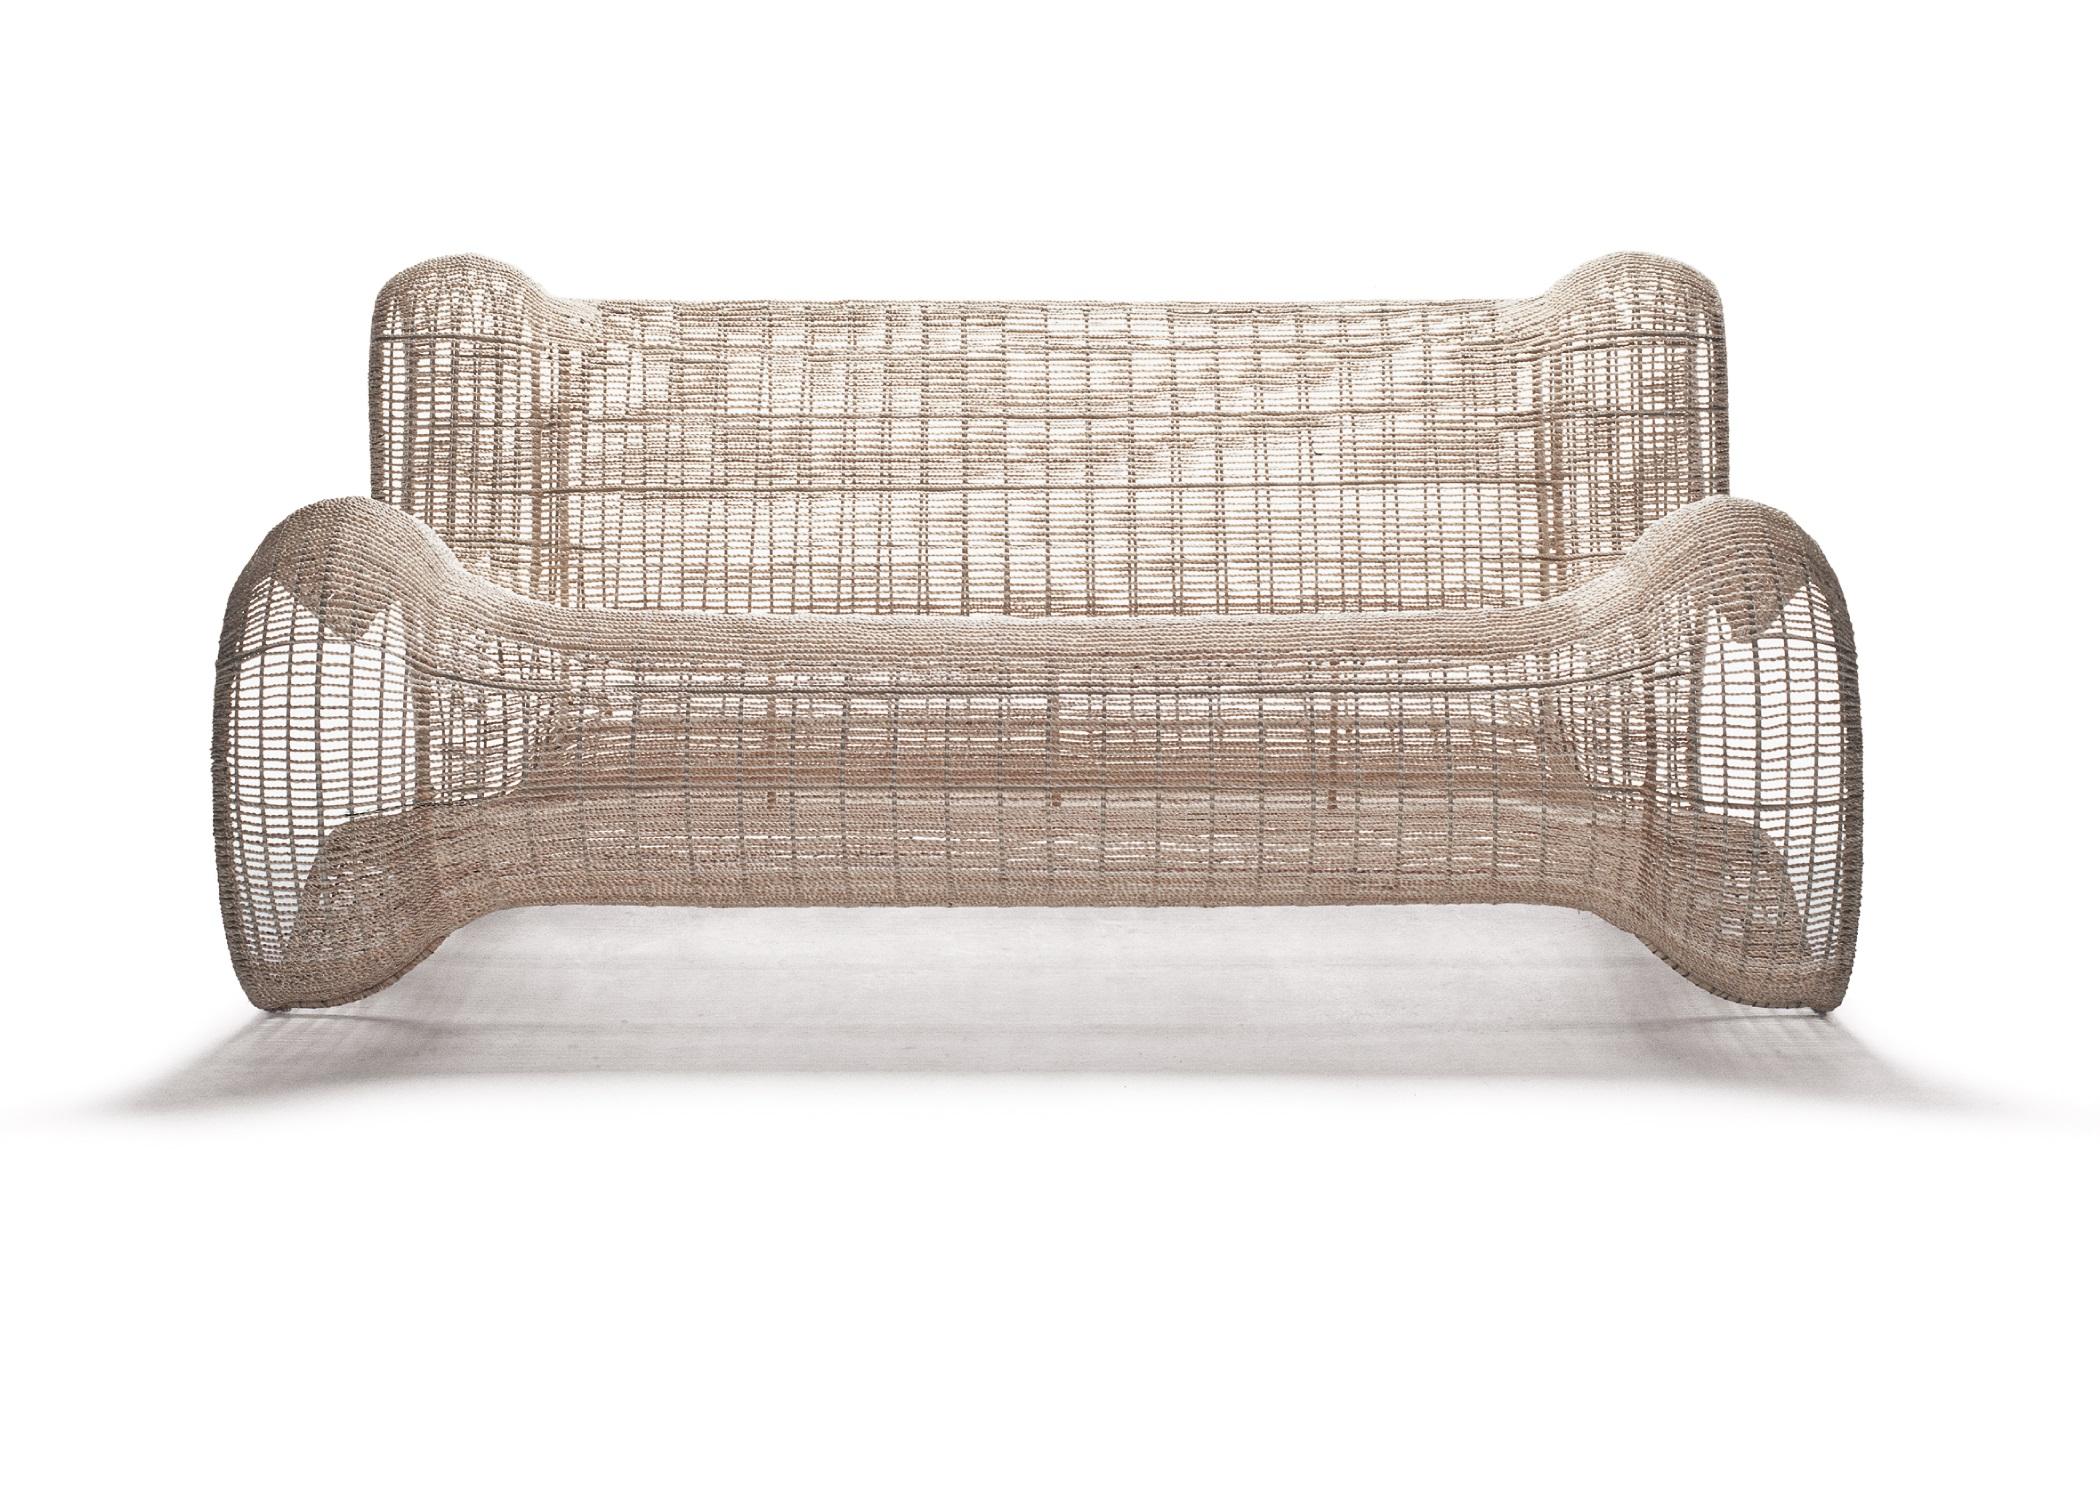 Outdoor pigalle loveseat by Kenneth Cobonpue.
Materials: polyethelene, steel. 
Also available in other colors and for indoors. Prices for upholstery and fabric upon request. 
Dimensions: 100 cm x 158 cm x H 77.5 cm.

Experience the sculptural